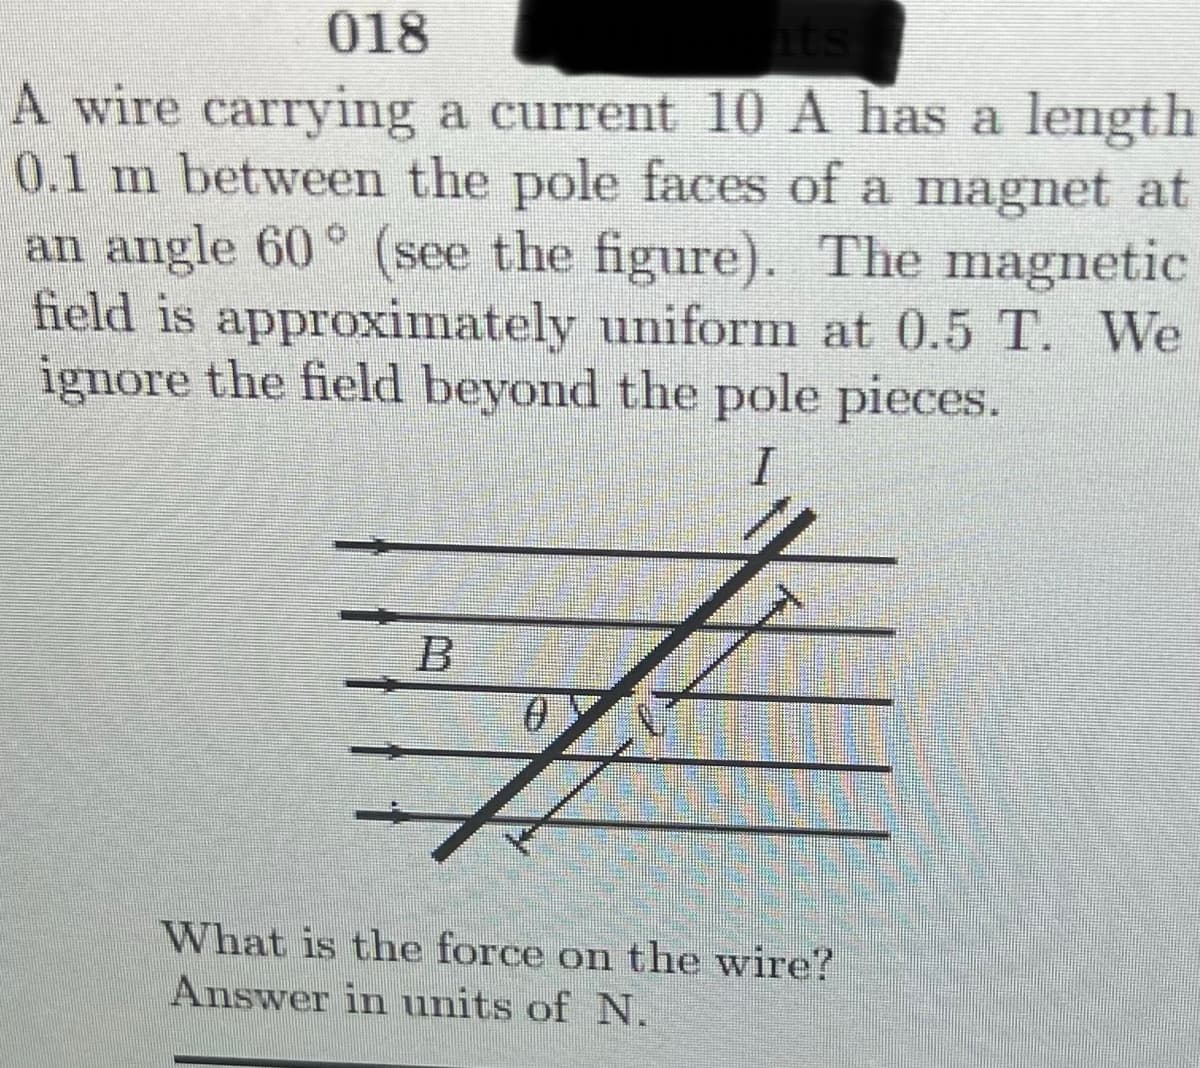 018
A wire carrying a current 10 A has a length
0.1 m between the pole faces of a magnet at
an angle 60° (see the figure). The magnetic
field is approximately uniform at 0.5 T. We
ignore the field beyond the pole pieces.
What is the force on the wire?
Answer in units of N.
